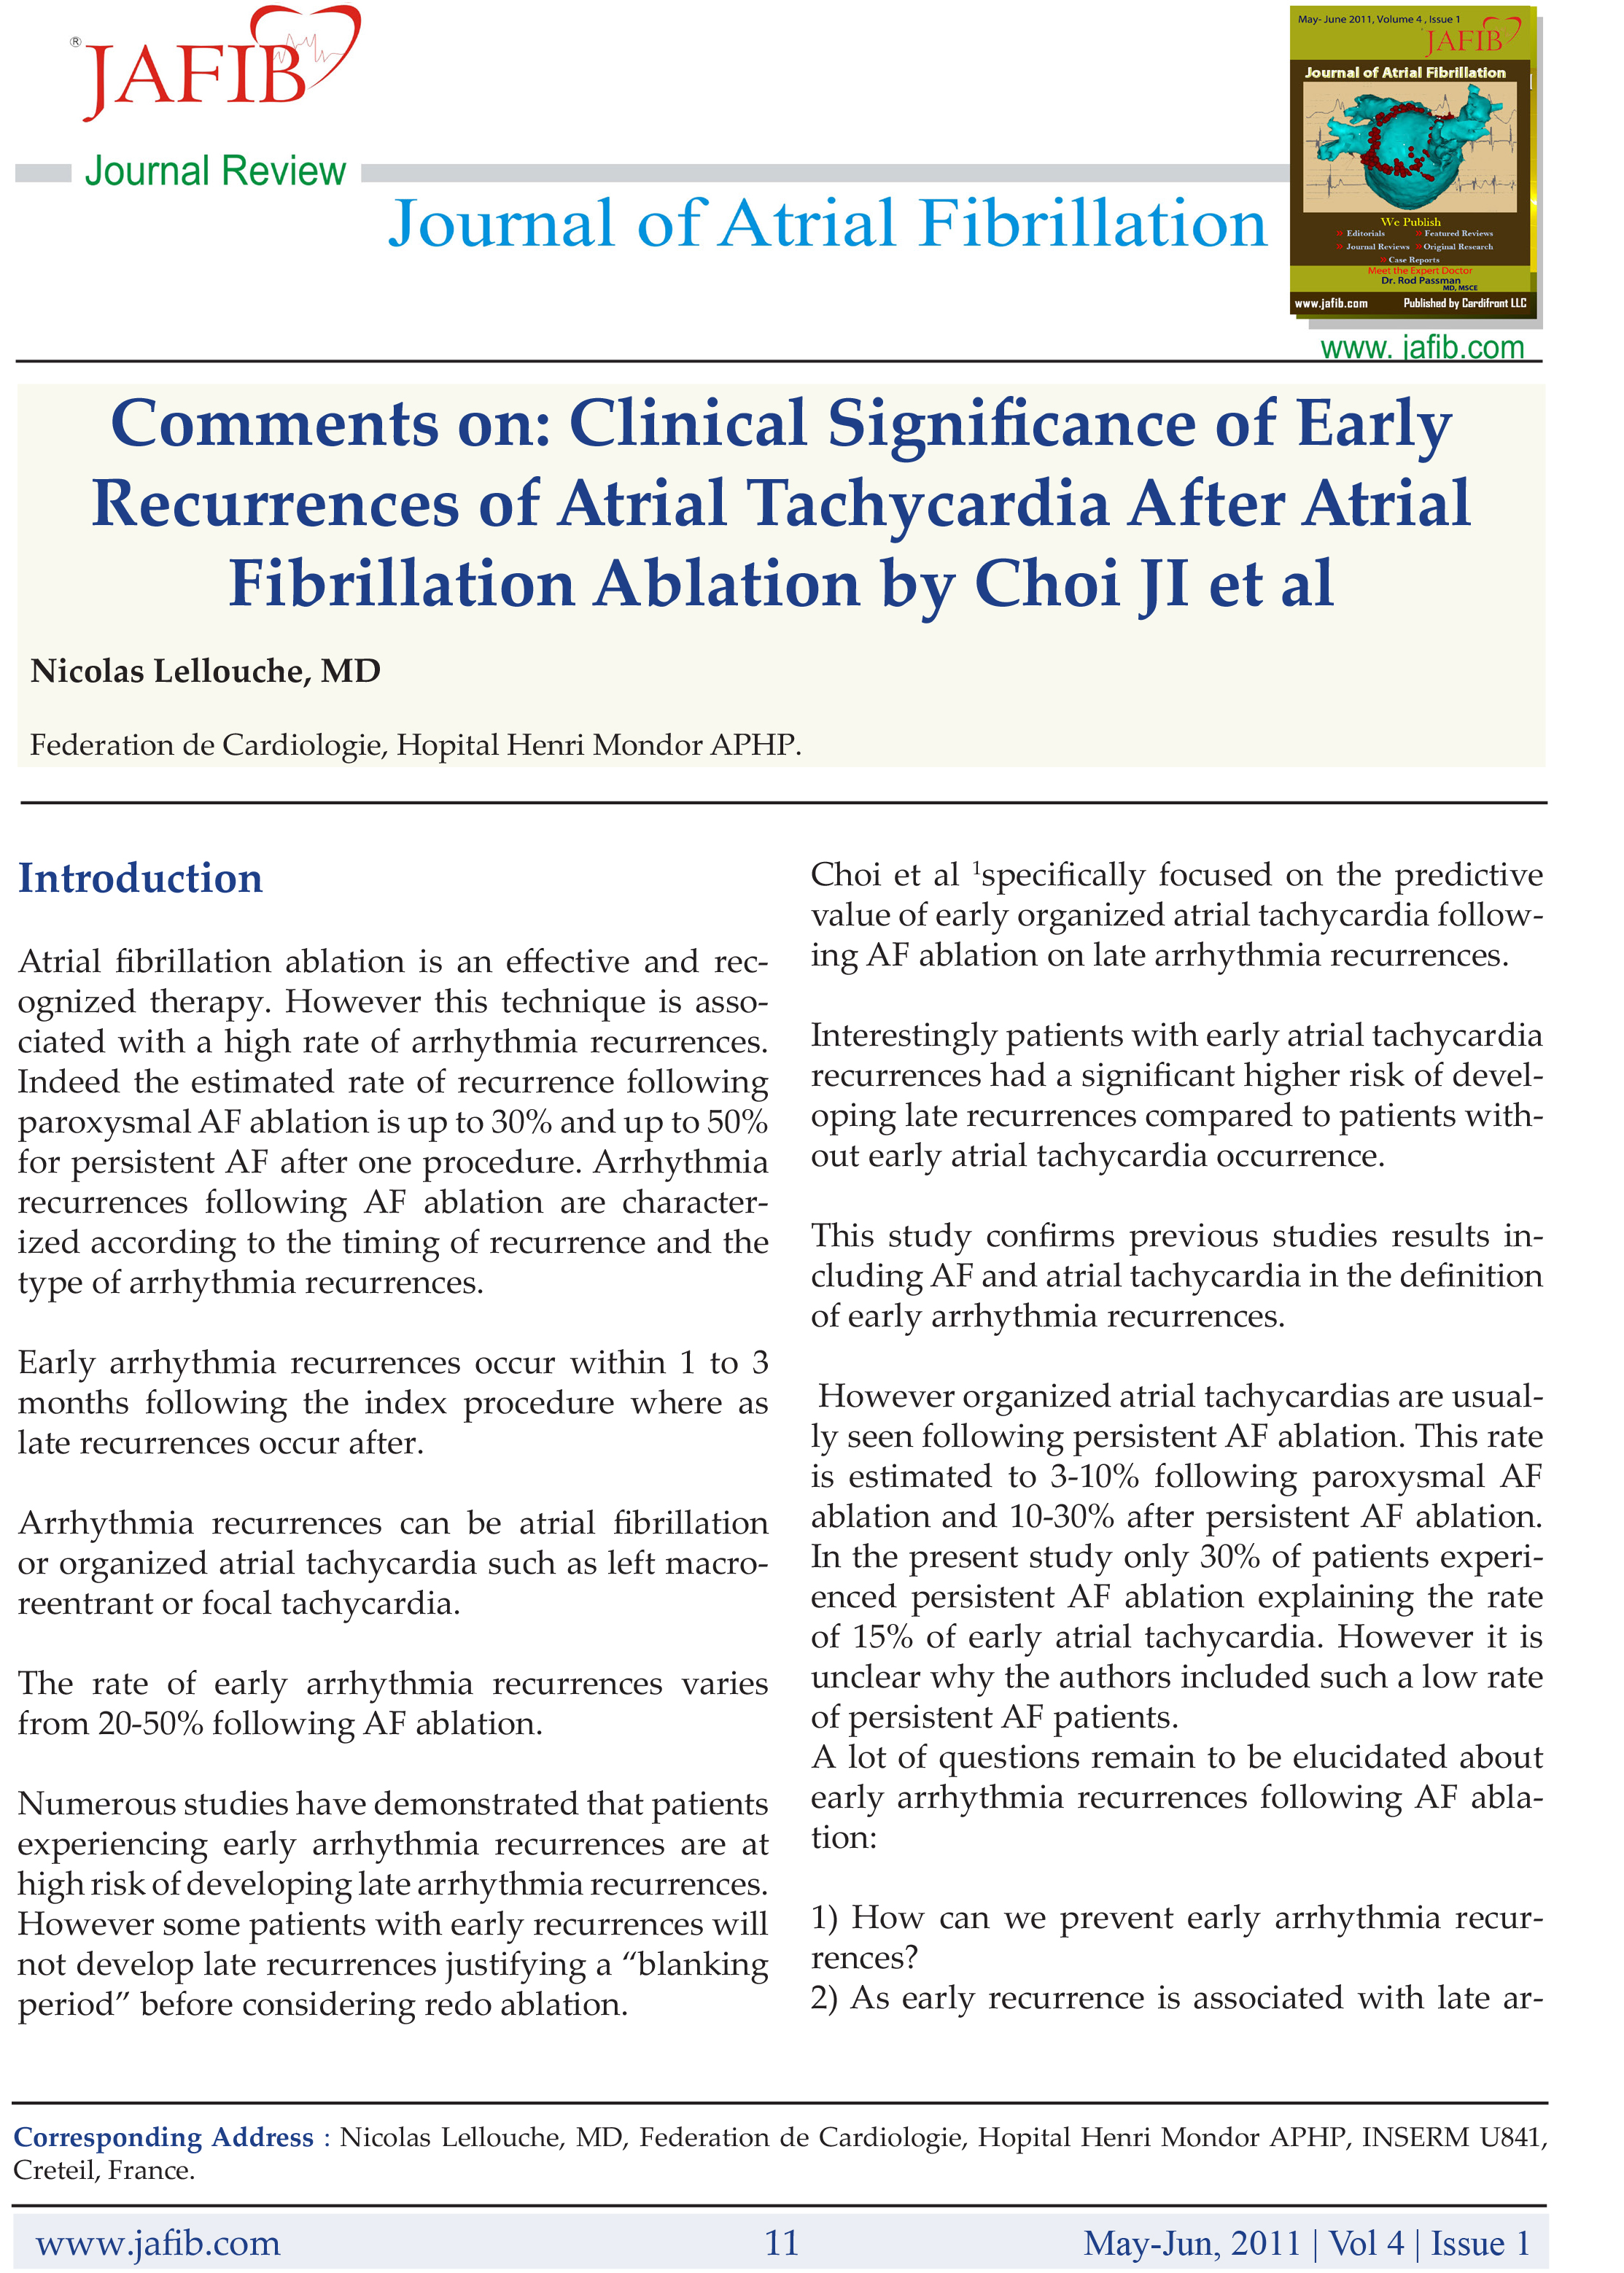 Comments on: Clinical Significance of Early Recurrences of Atrial Tachycardia After Atrial Fibrillation Ablation